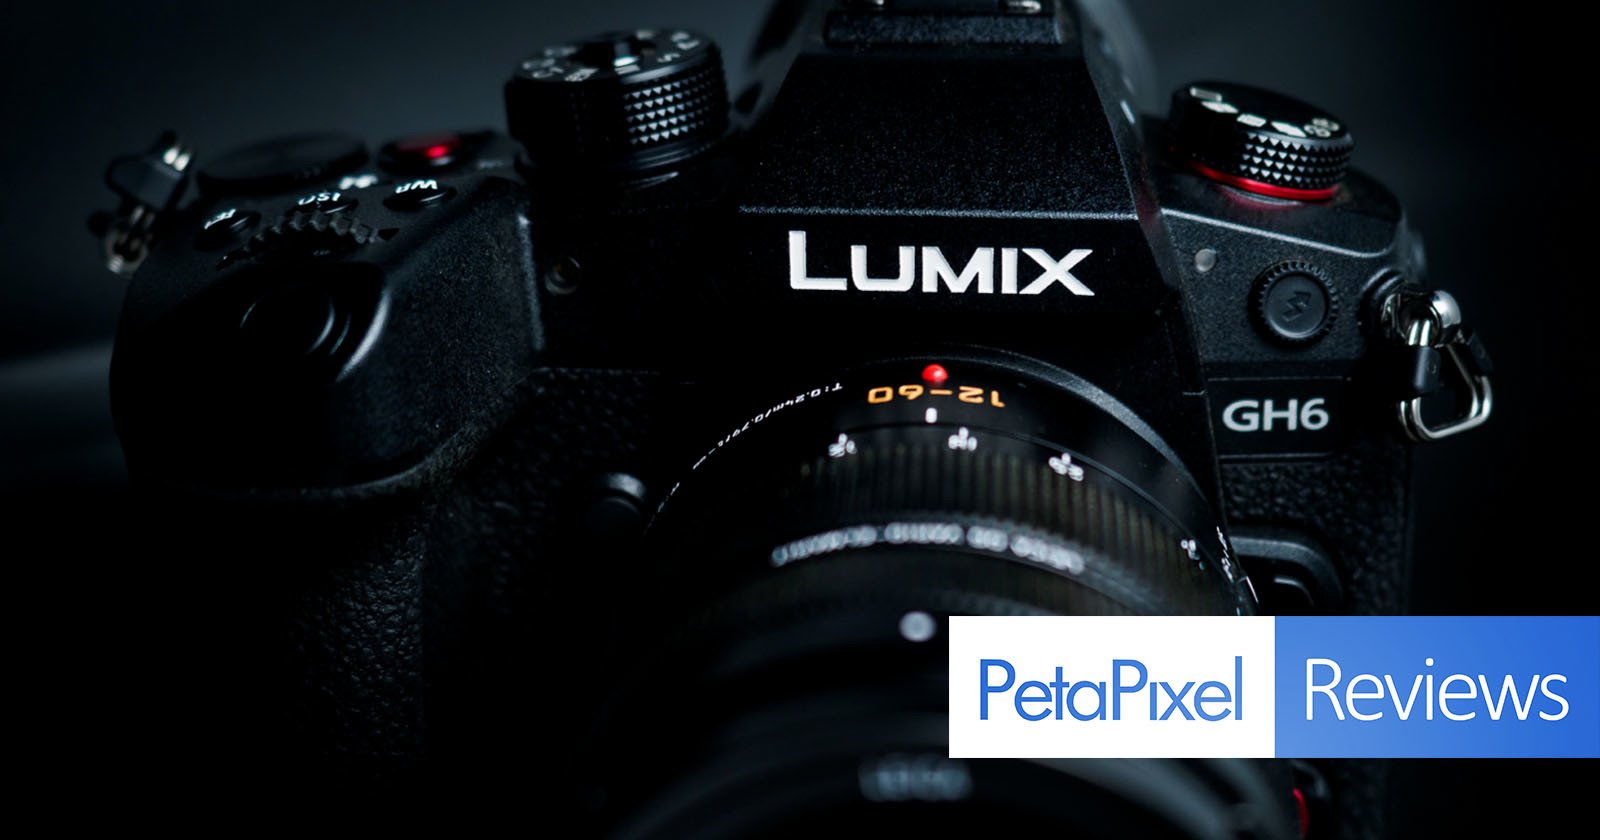 Panasonic GH6 Review: One of the Best Hybrid Cameras You Can Buy